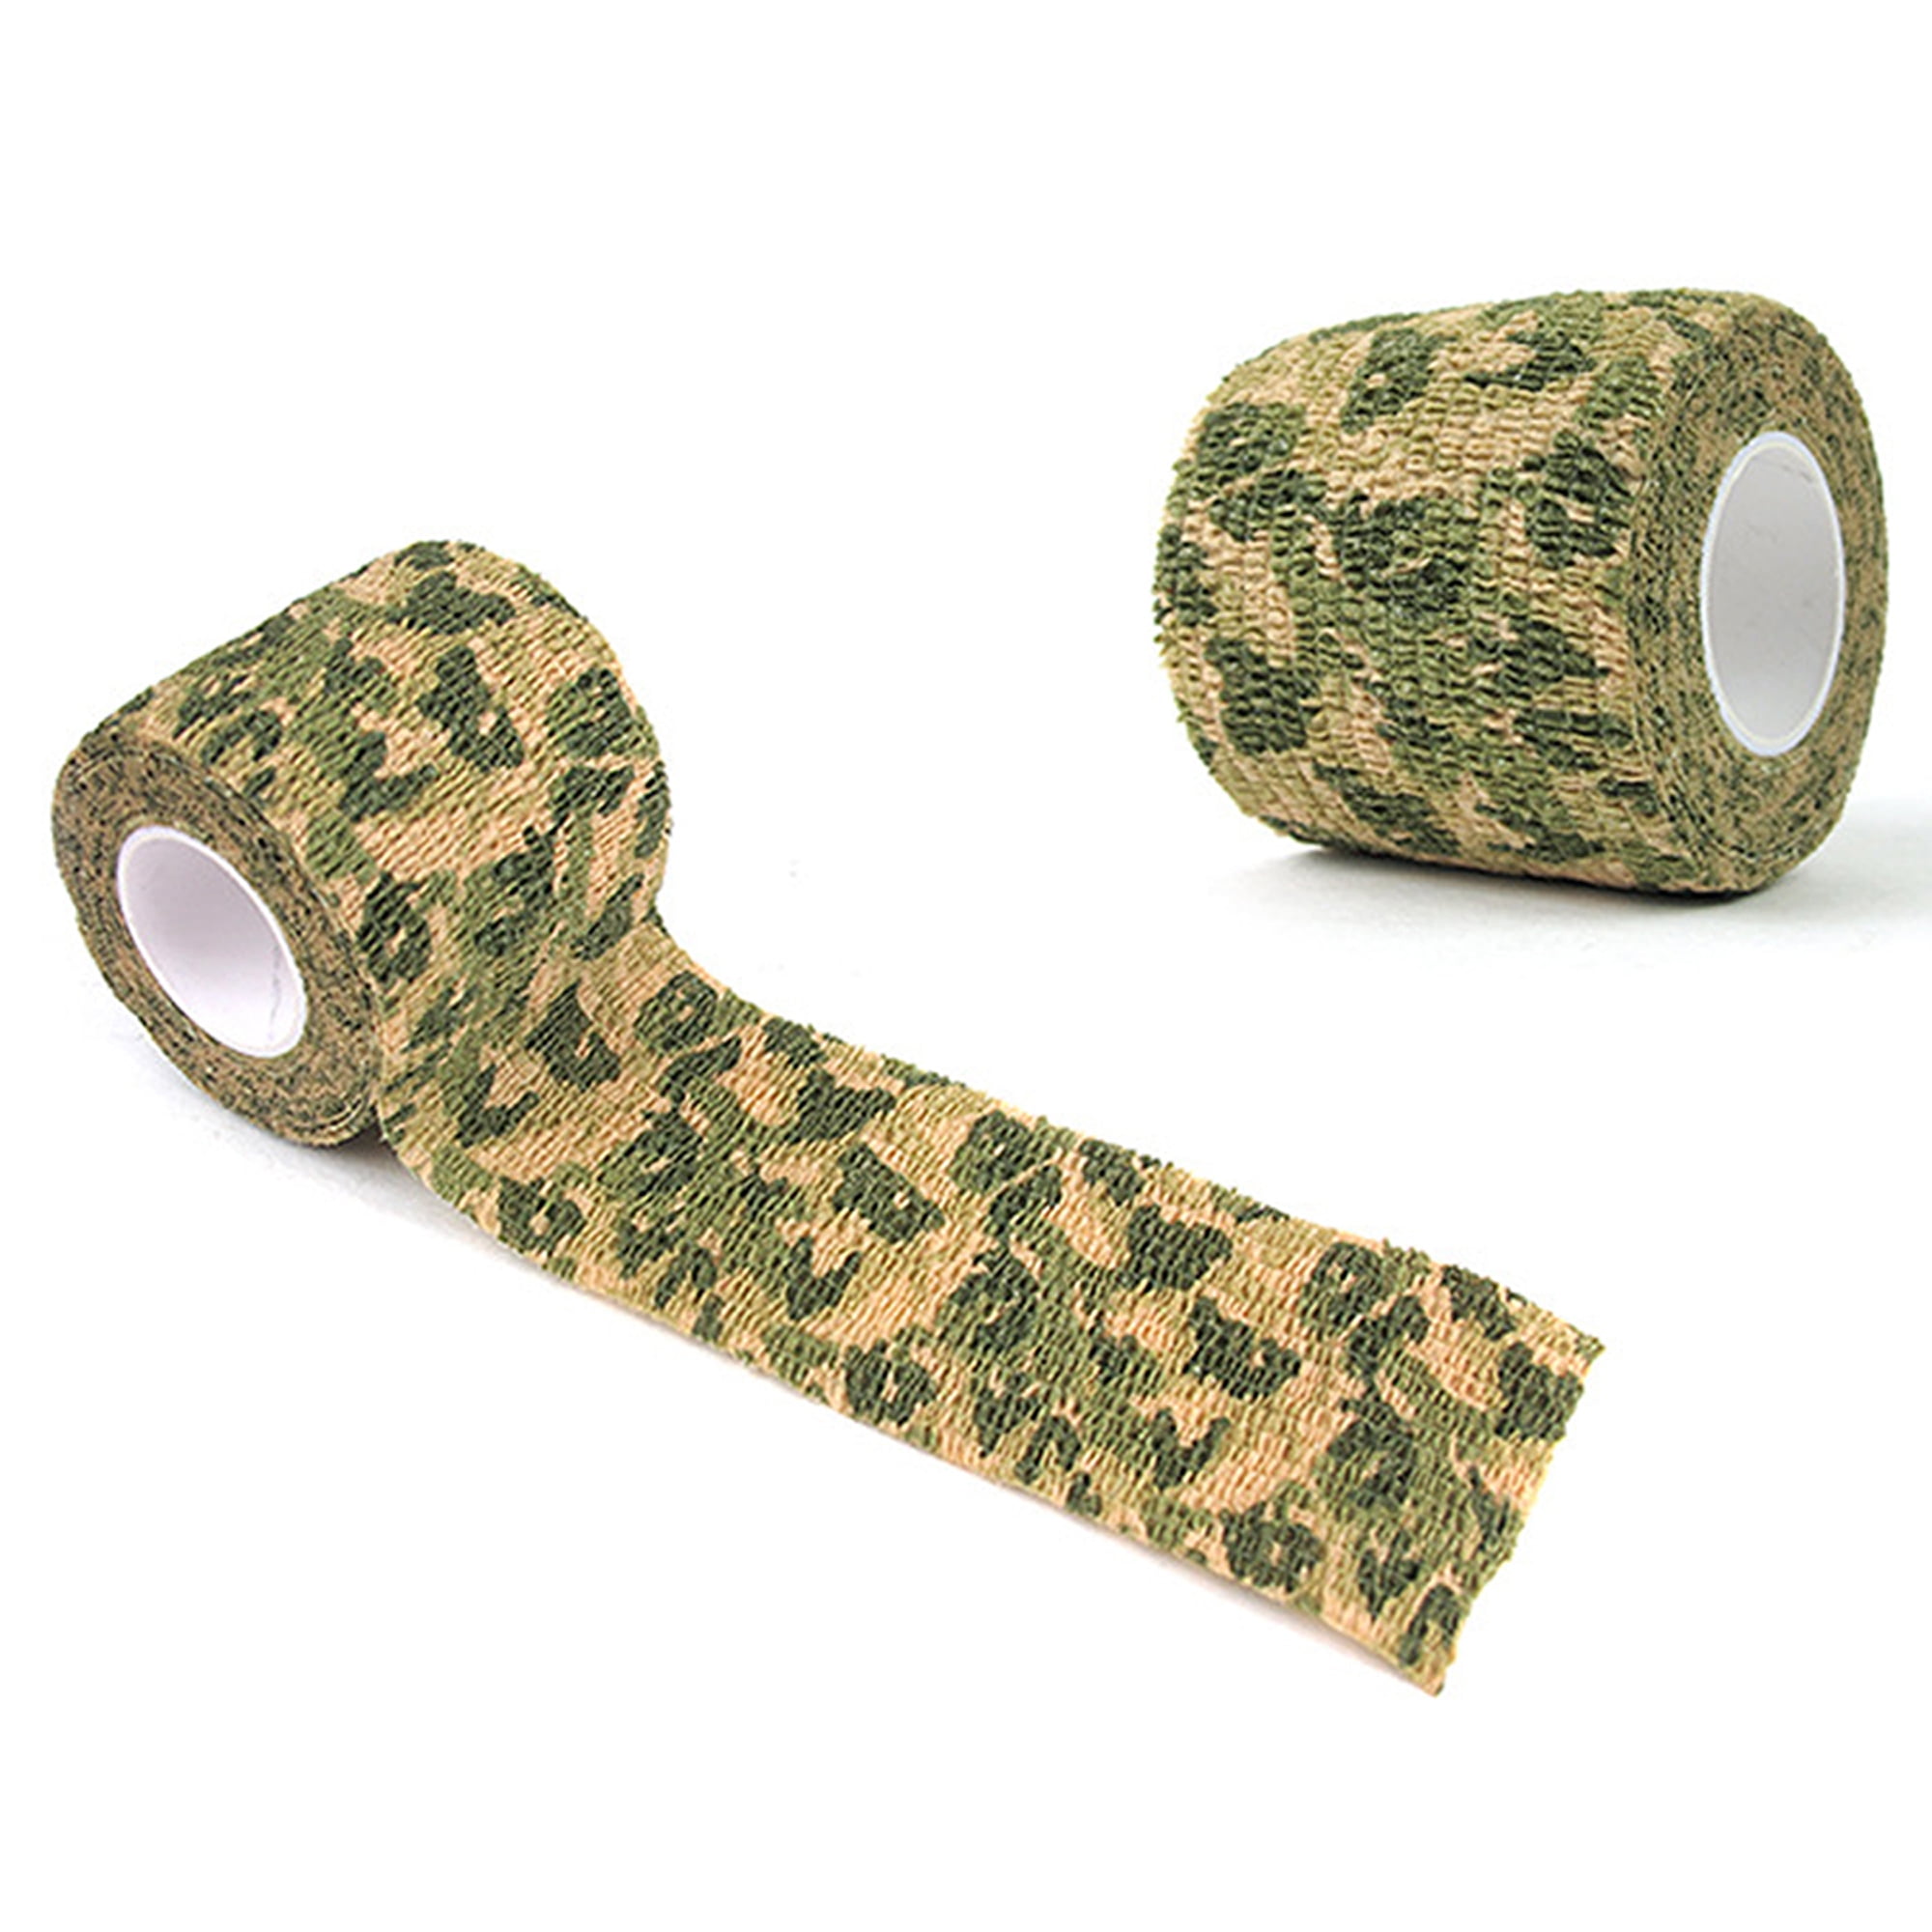 Details about   Protable Camo Gun Hunting Waterproof Camping Camouflage Stealth Duct Tape Wrap~ 